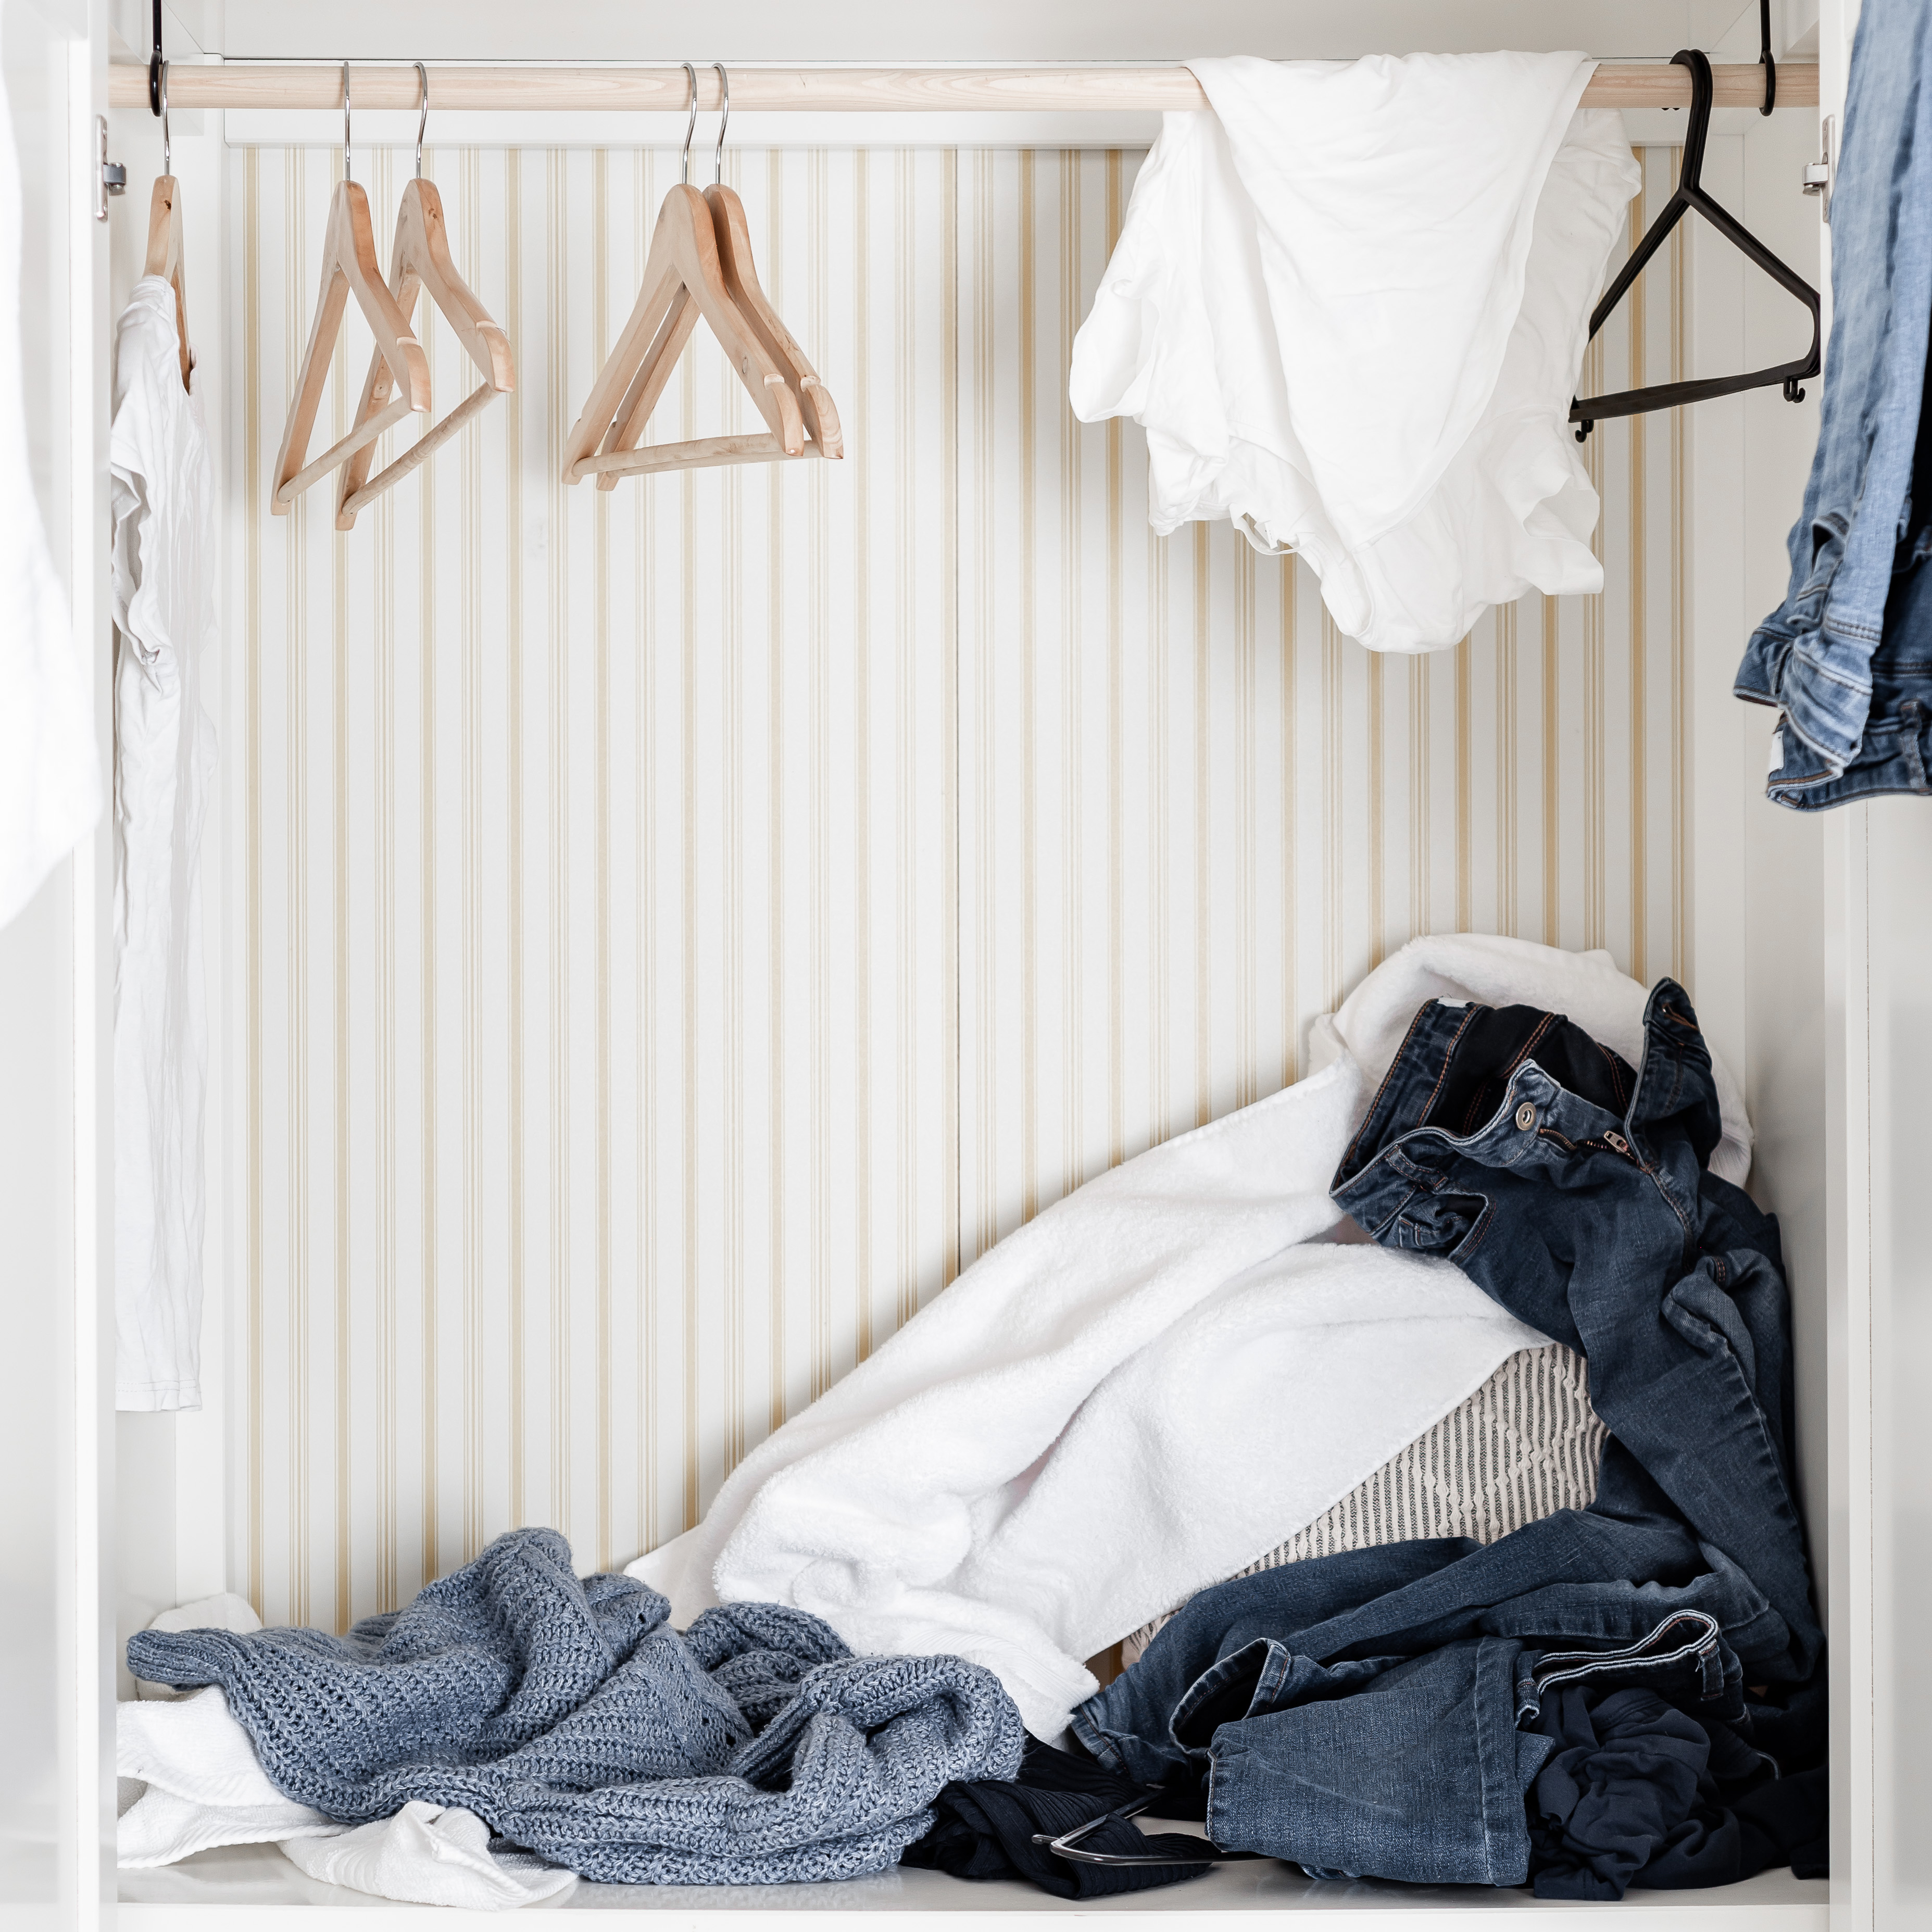 brown-wooden-hangers-in-a-wardrobe-with-white-and-blue-clothes-scattered-down